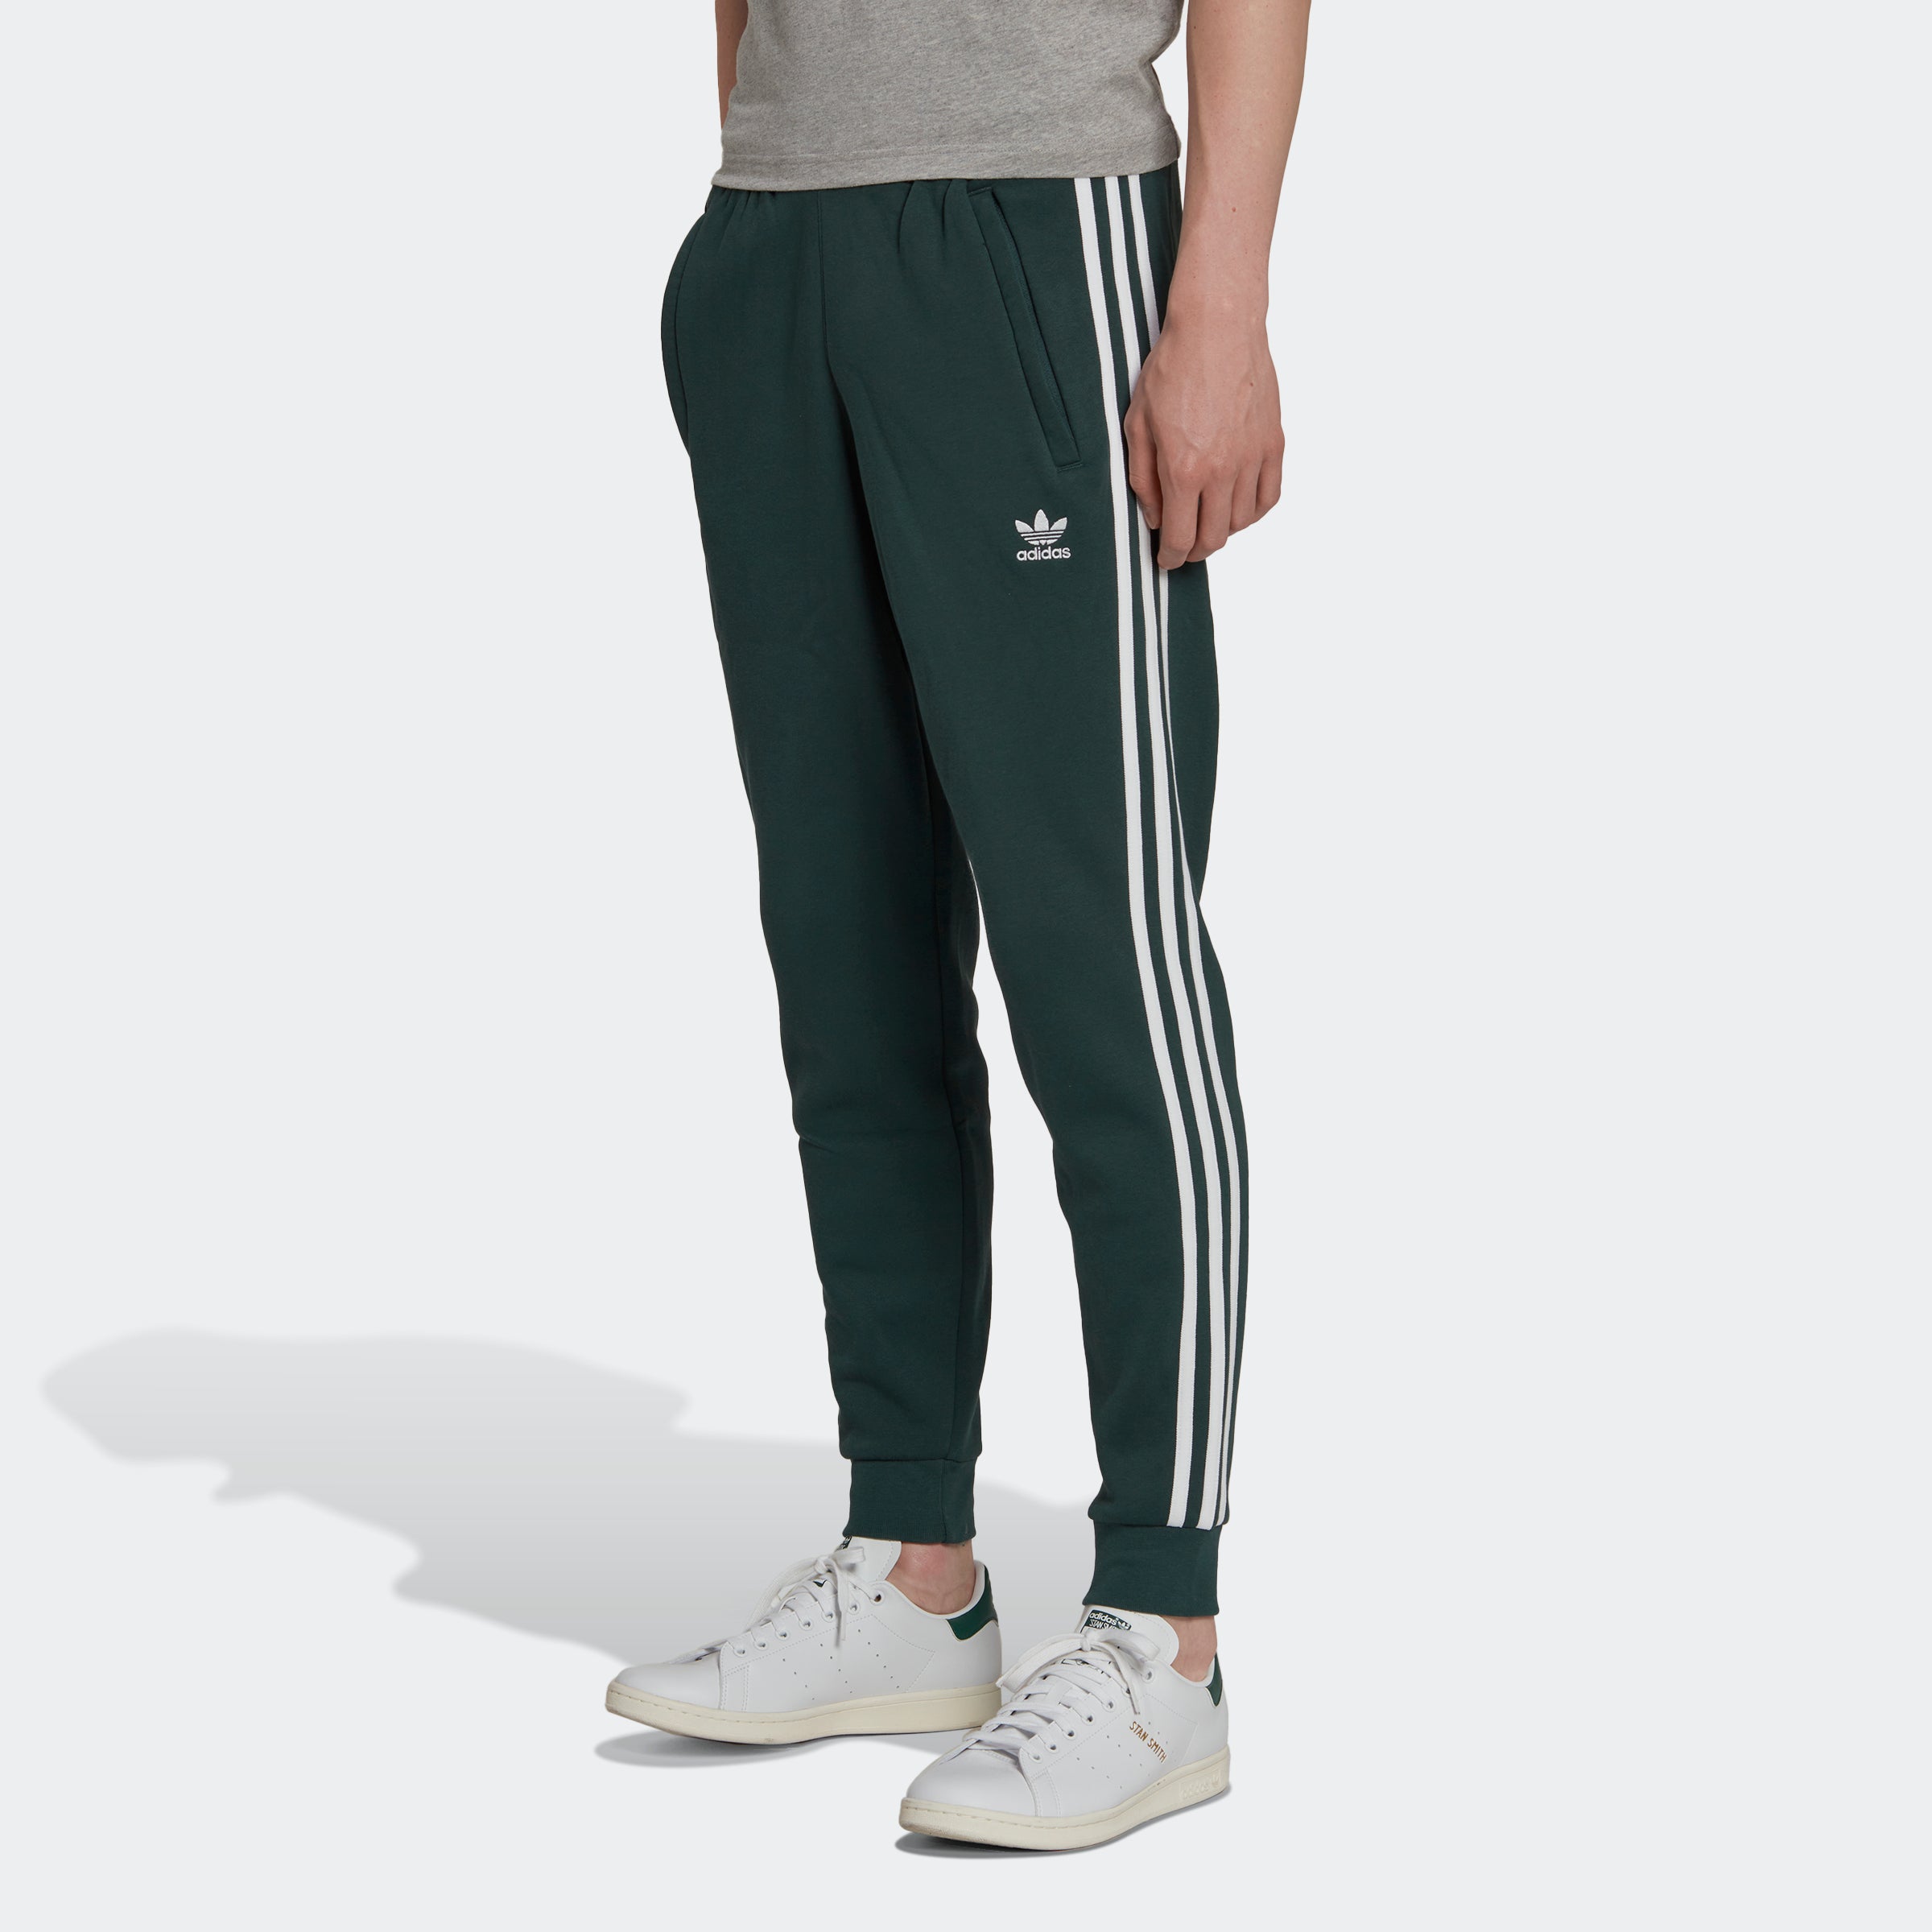 adidas Adicolor 3-Stripes Pants Mineral | City Chicago Green Sports